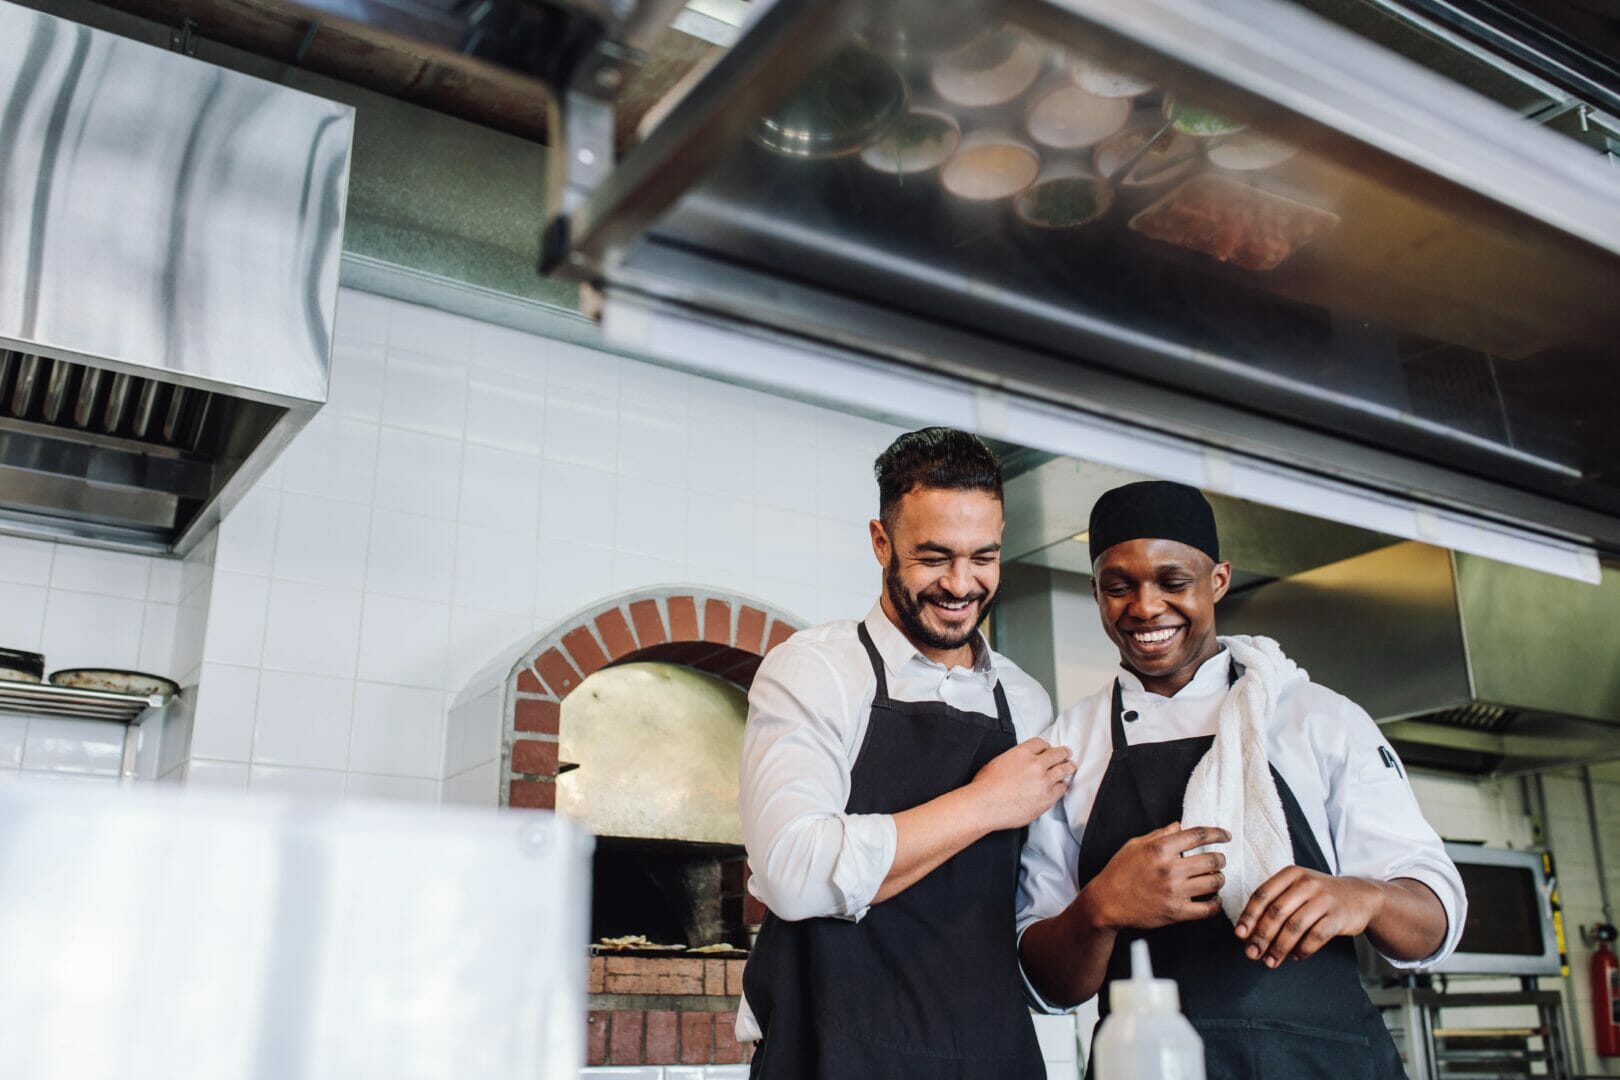 84% of hospitality professionals say it’s invaluable to form friendships at work